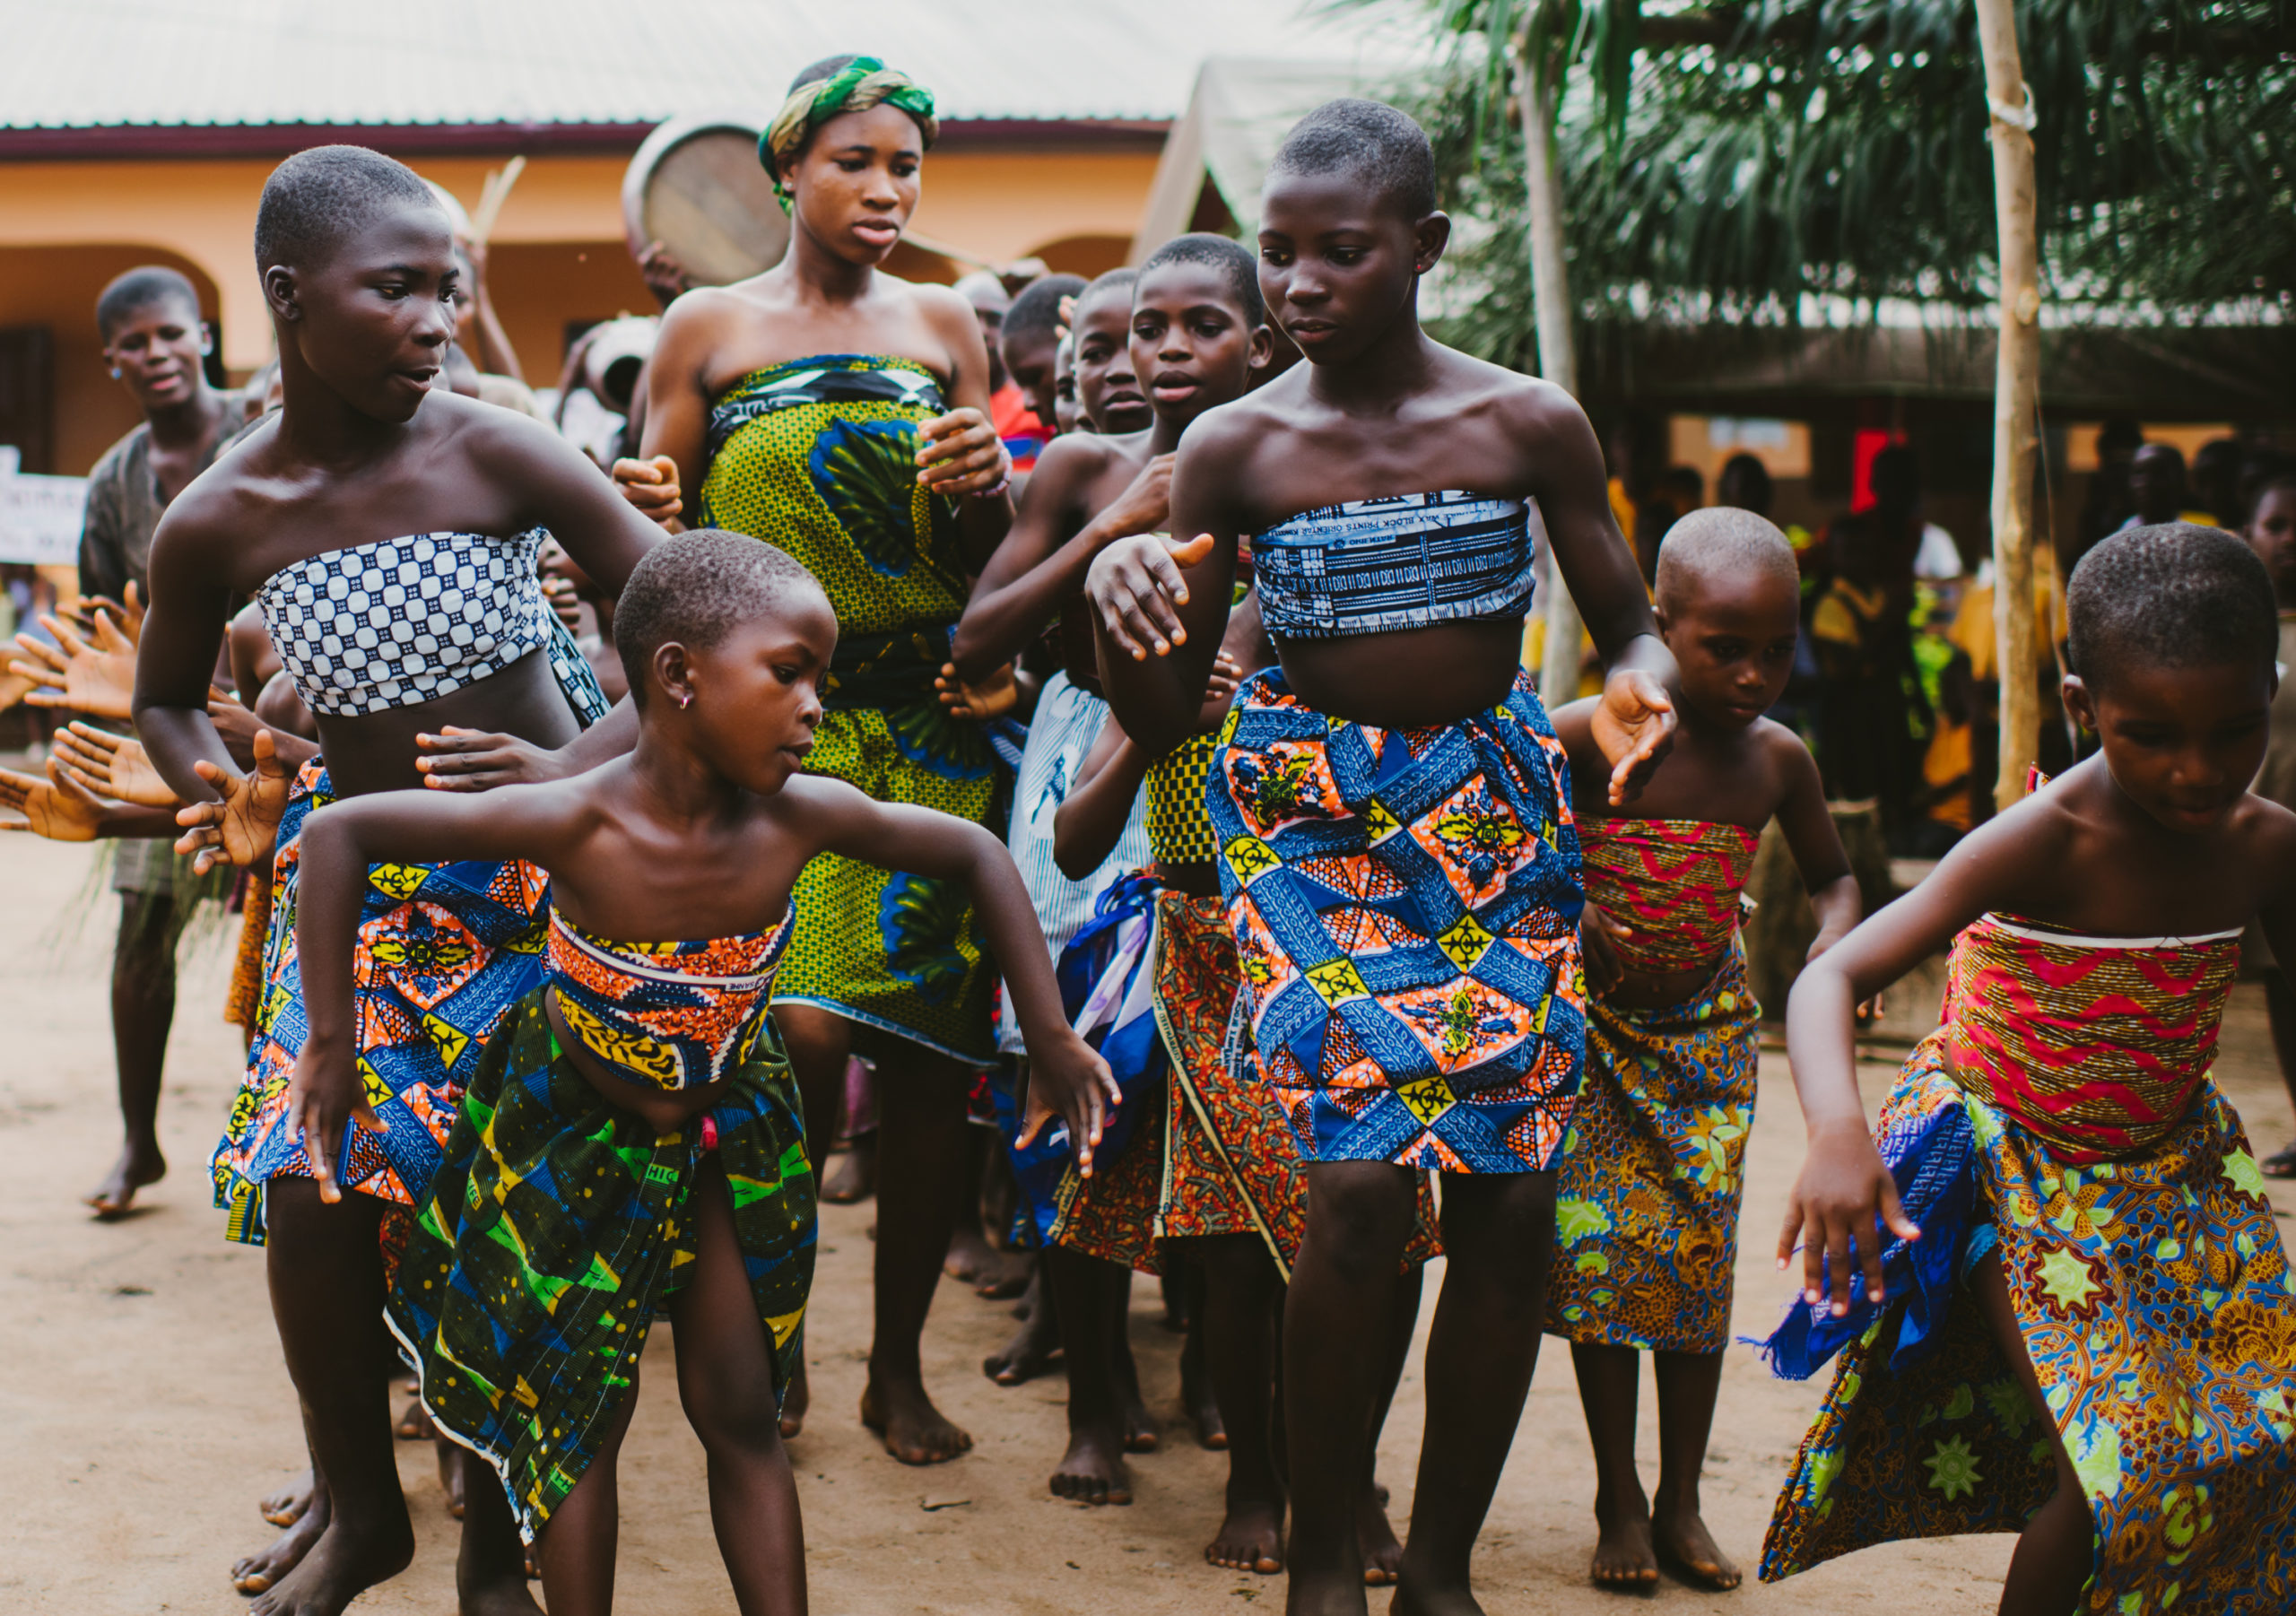 Community members in Ghana dance during the inauguration of a PoP school build. (Photo credit: Chi Chi Ari)